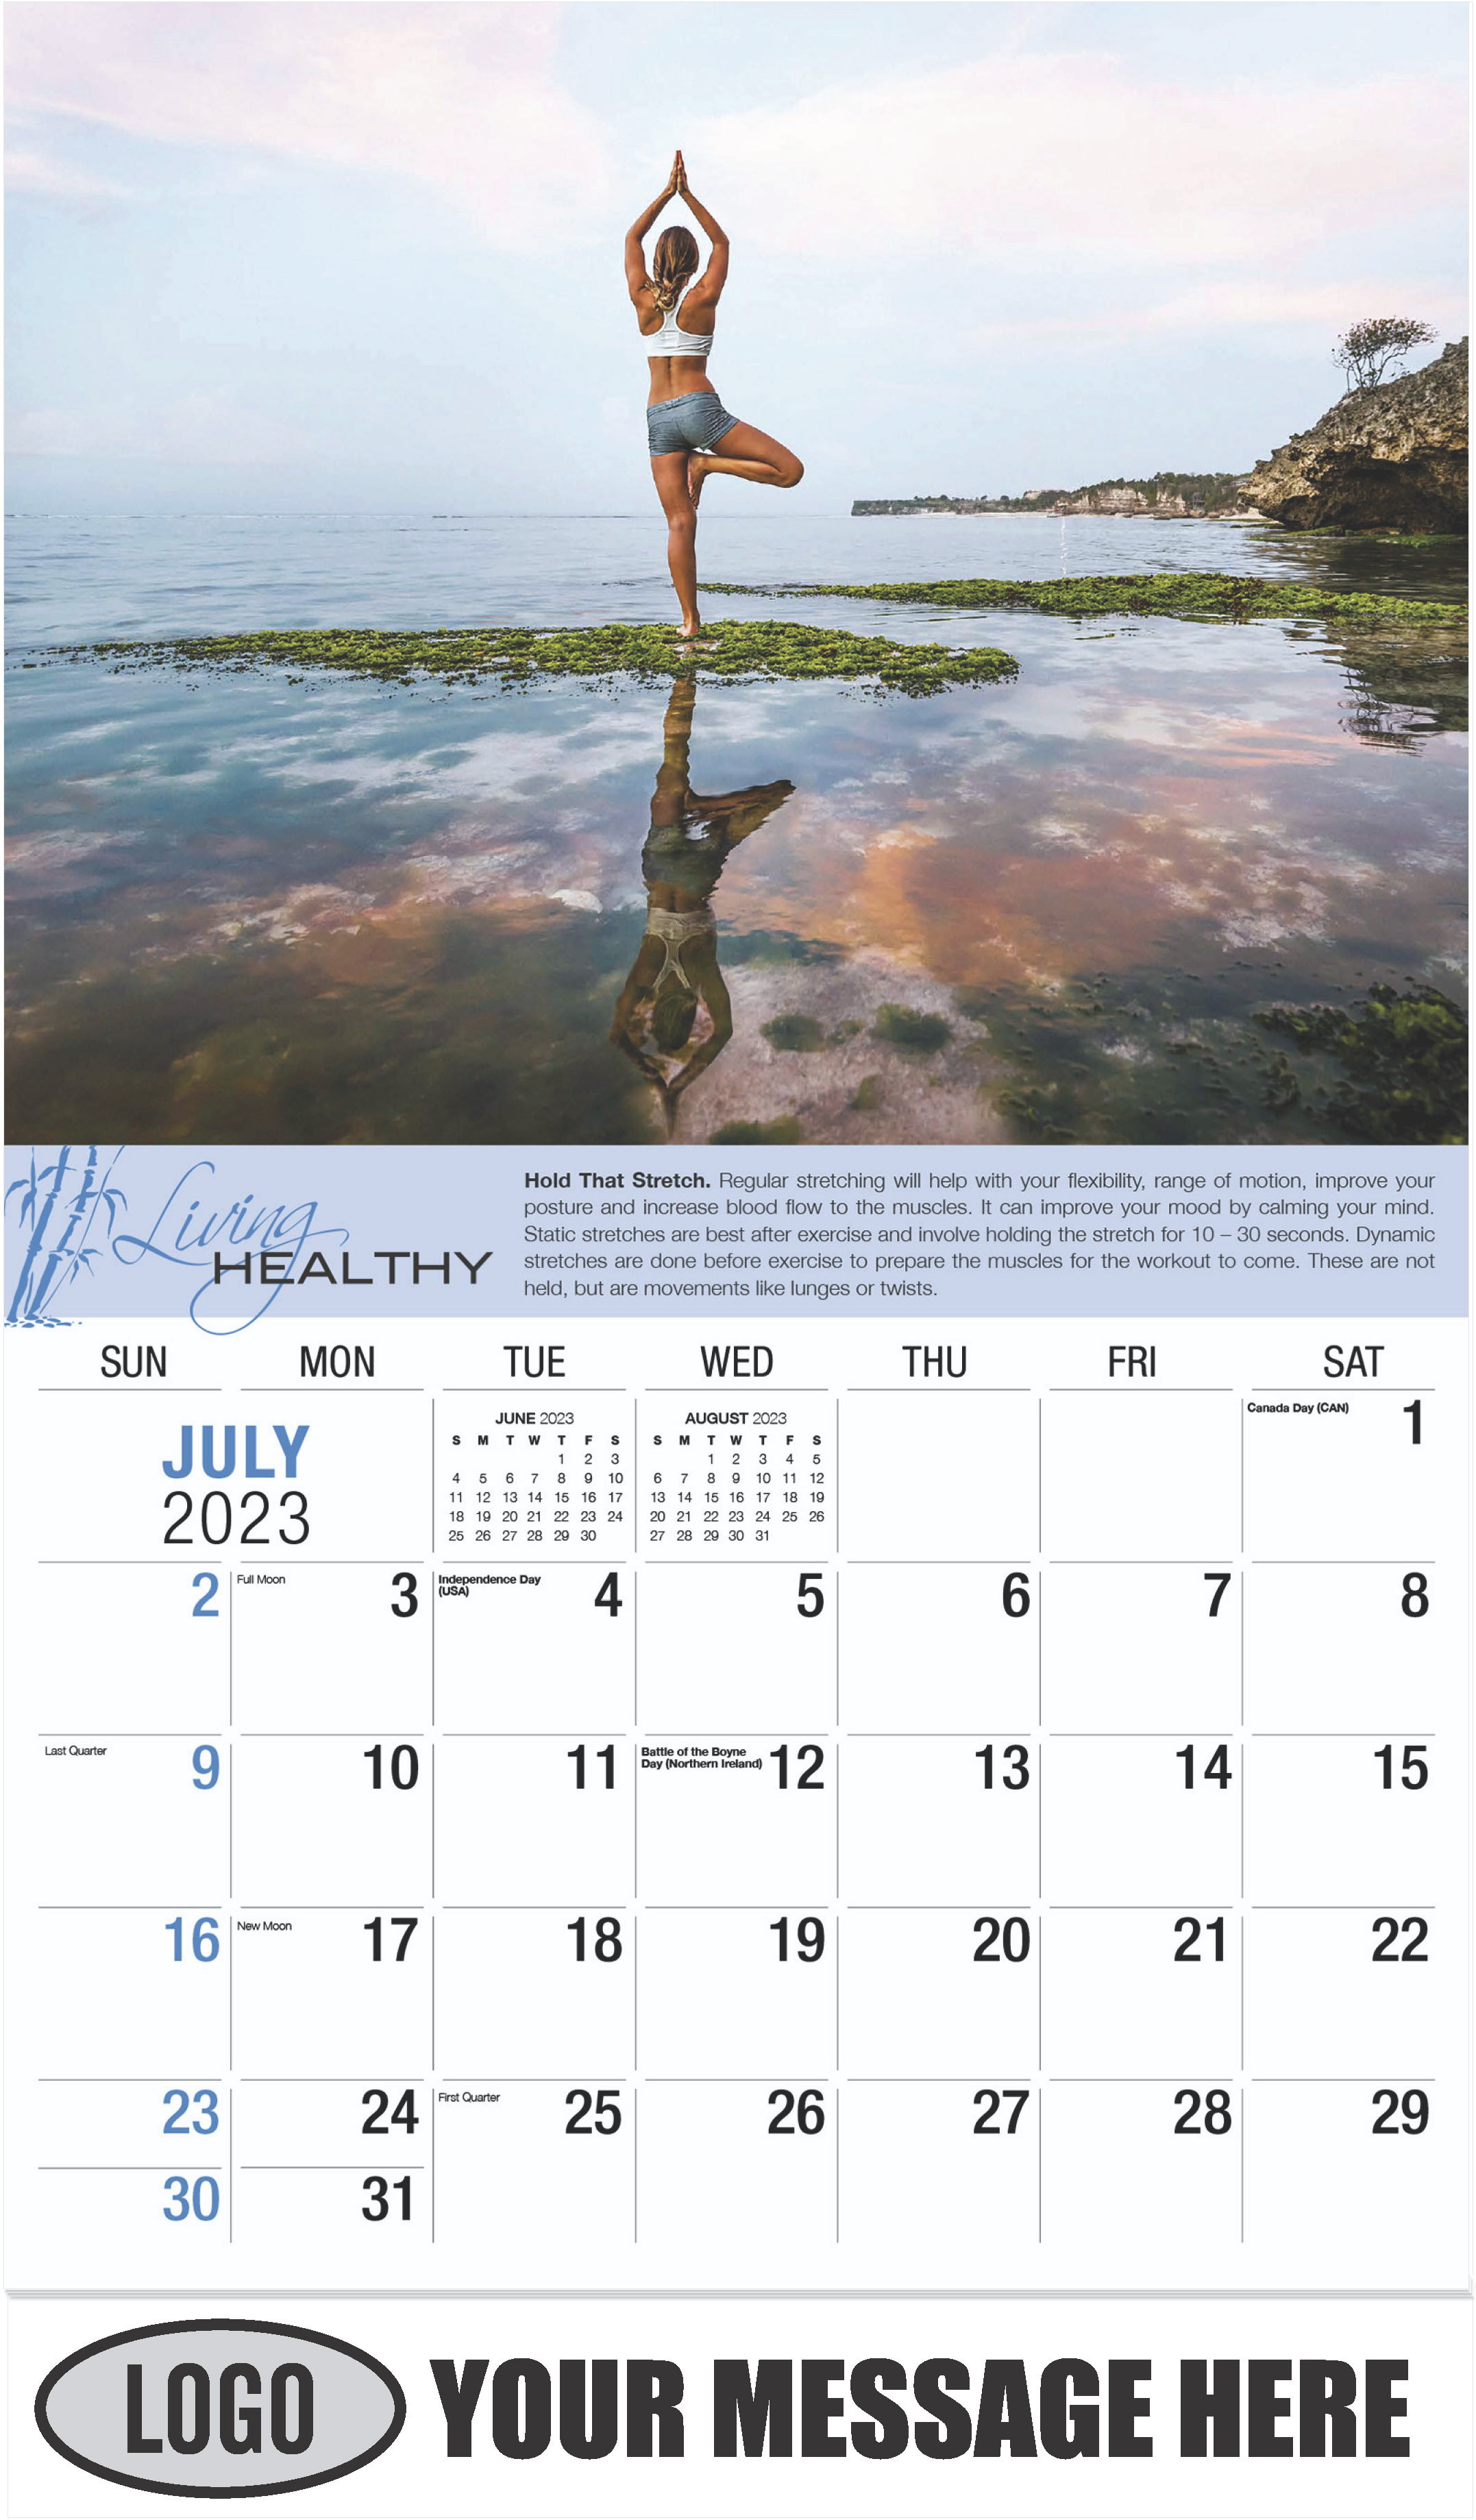 Woman Practicing Yoga - July - Living Healthy 2023 Promotional Calendar